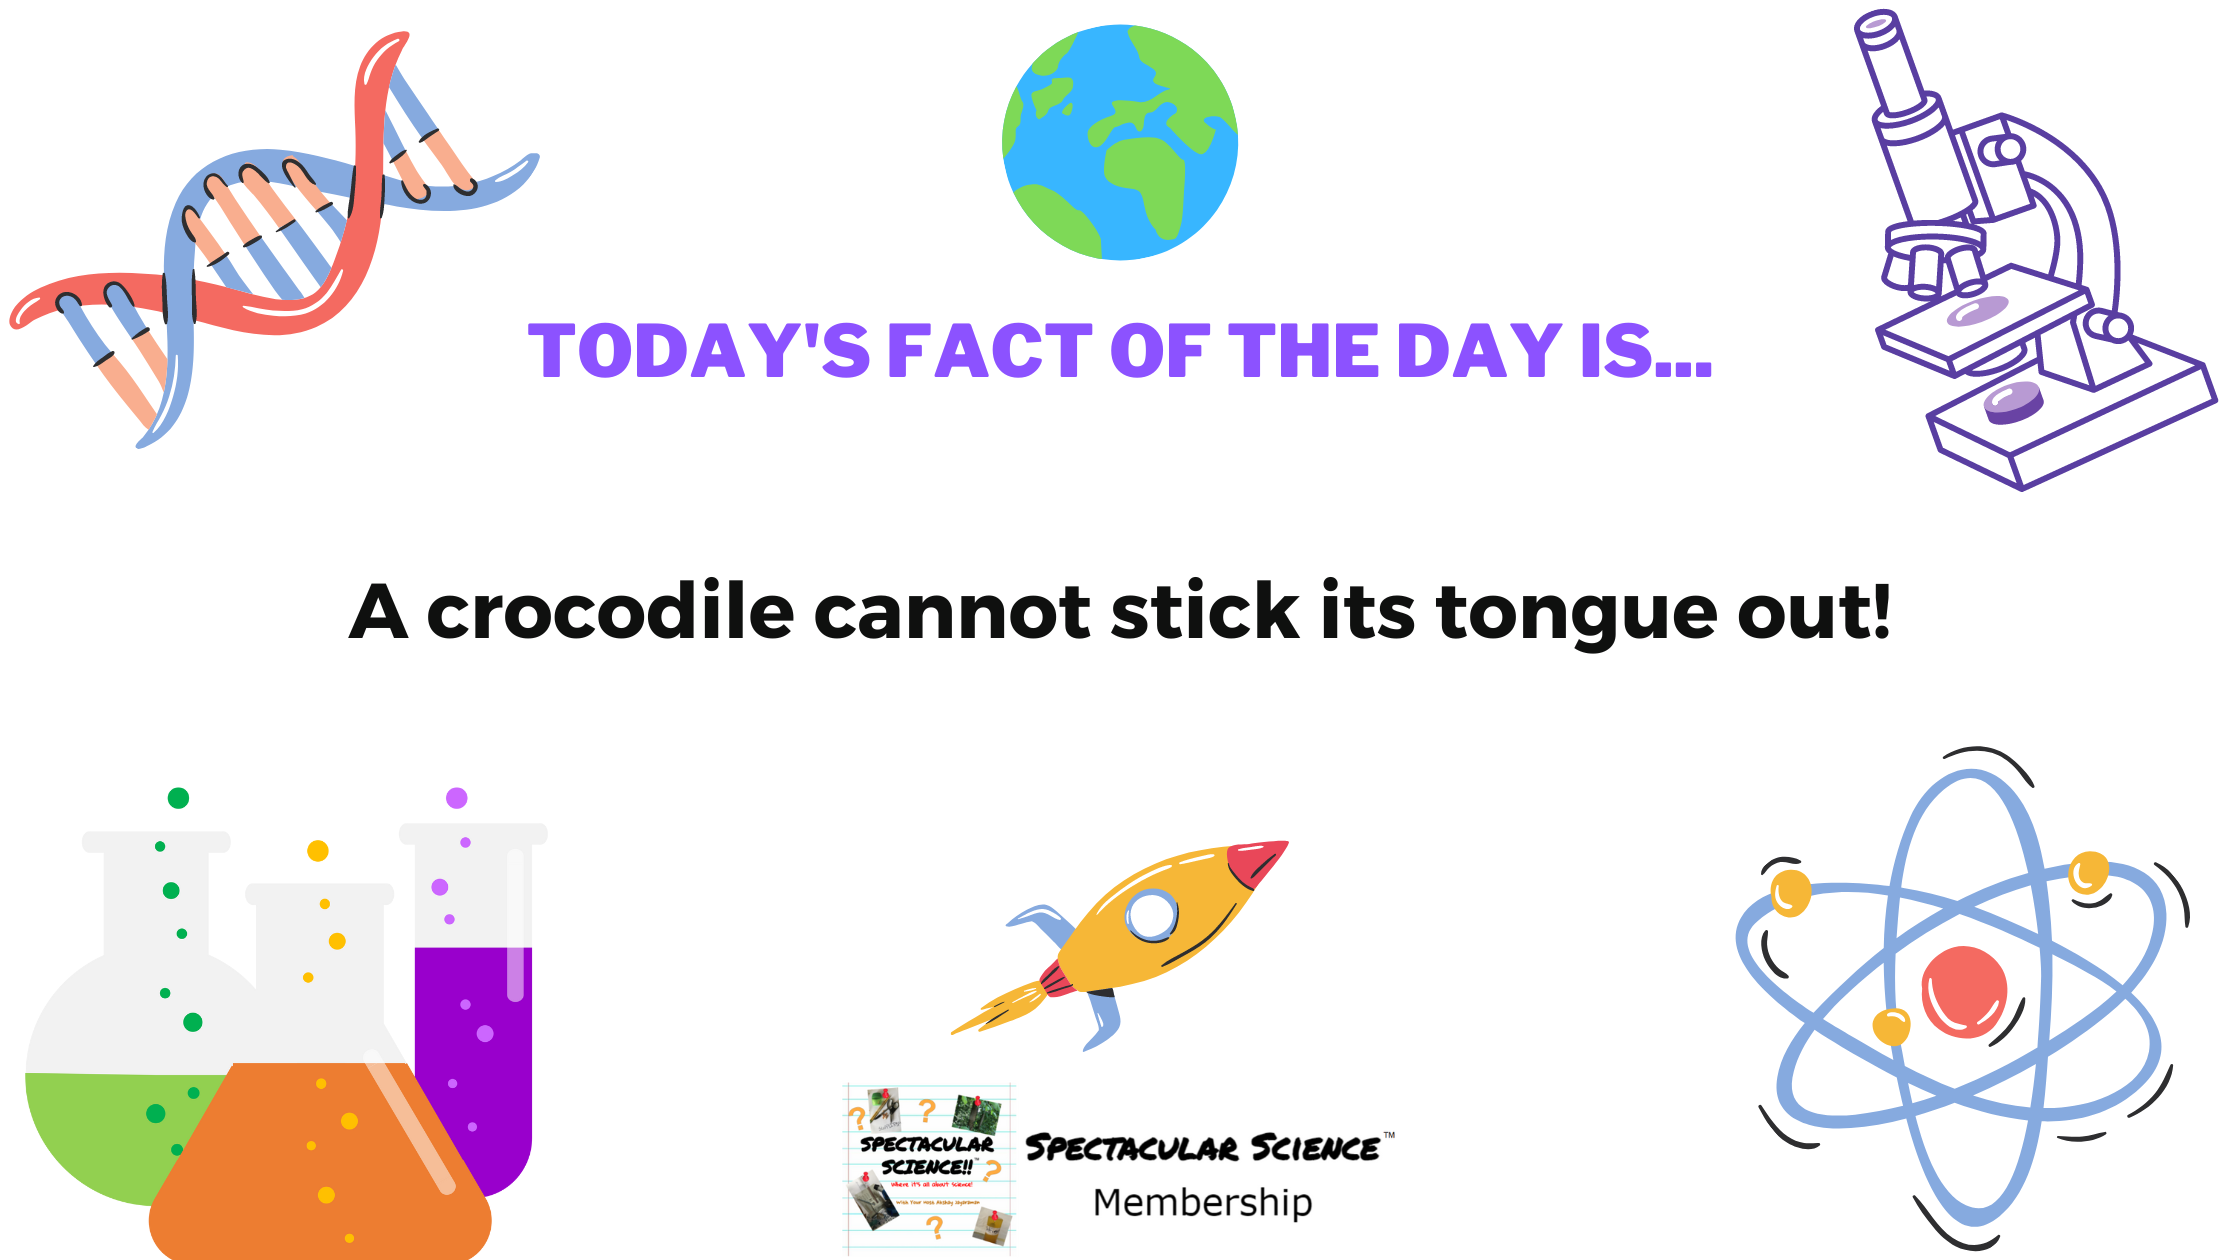 Fact of the Day Image July 31st